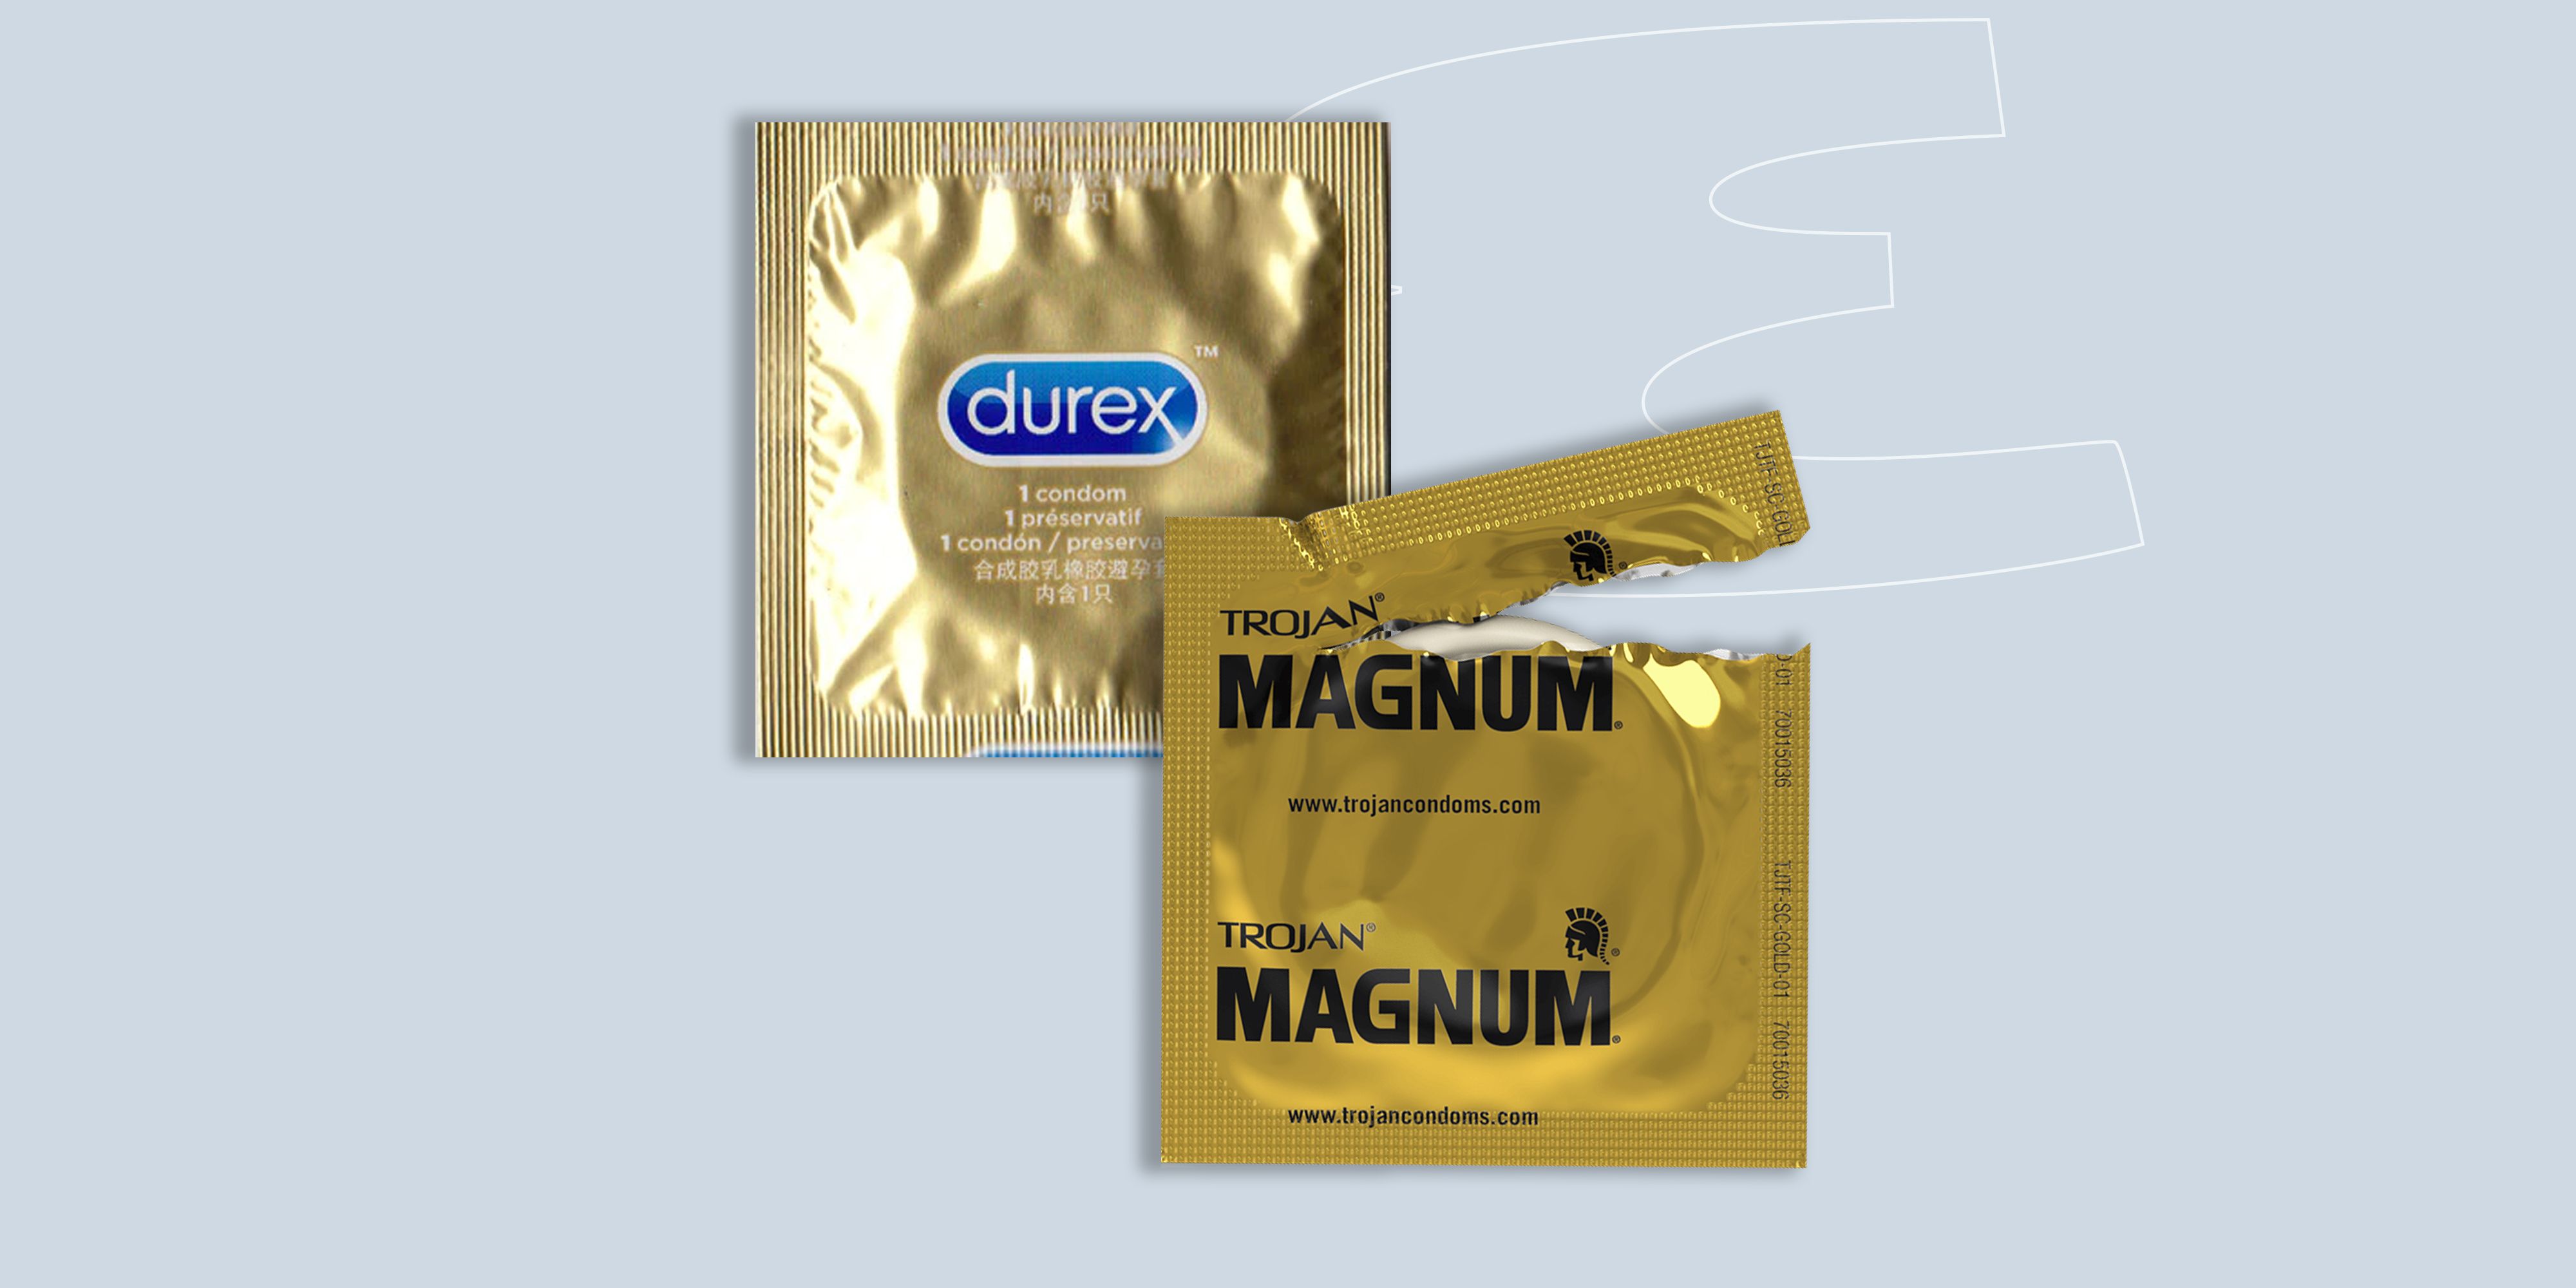 Looking to Buy Magnum Condoms in Bulk This Year. : Here